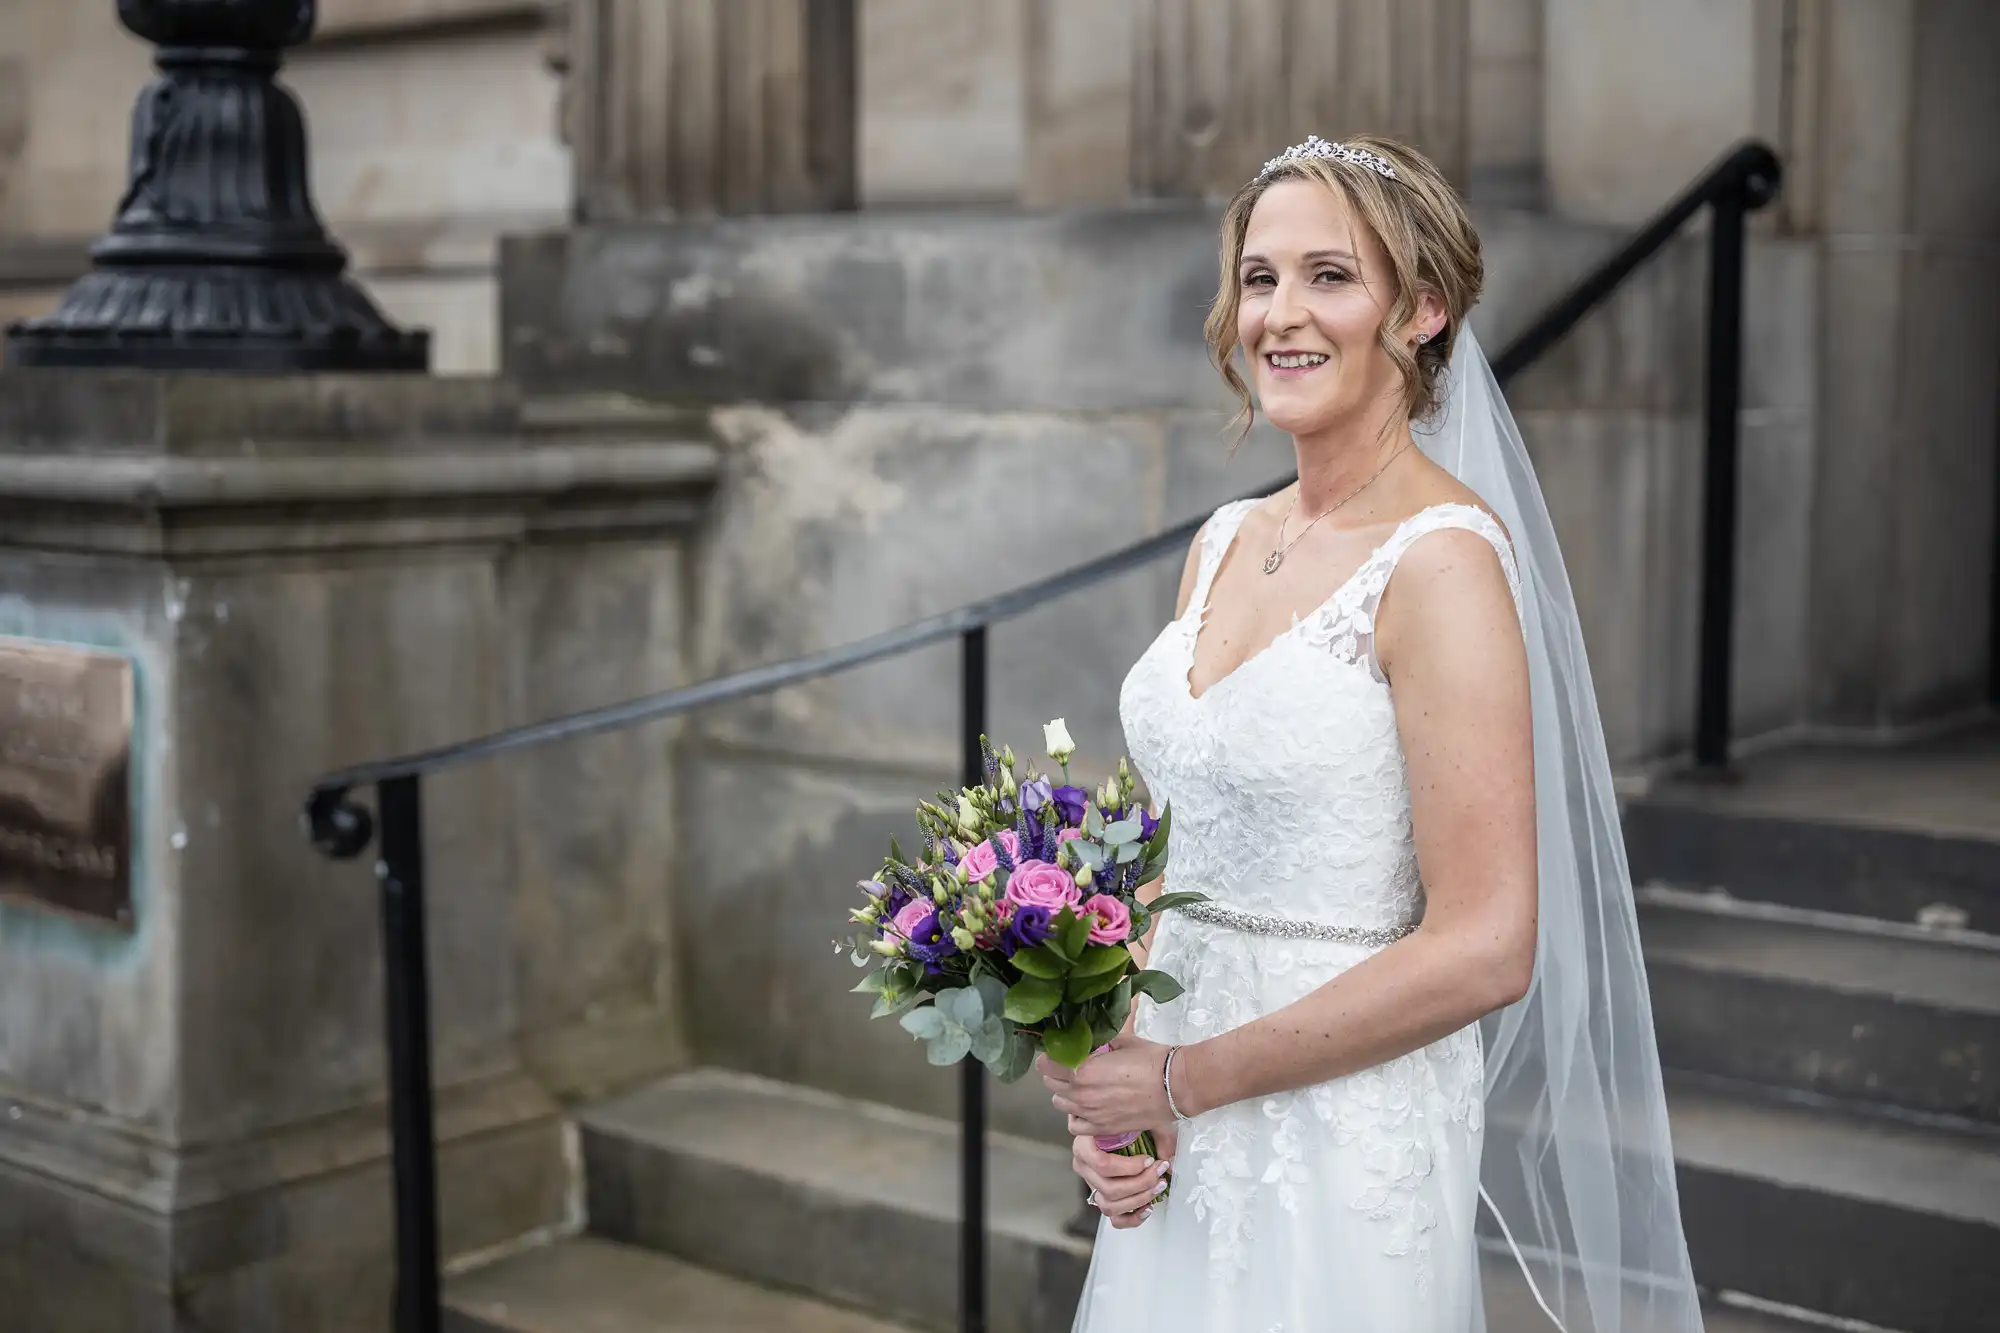 A bride in a white wedding dress holds a bouquet of flowers and smiles while standing outside a stone building with steps.